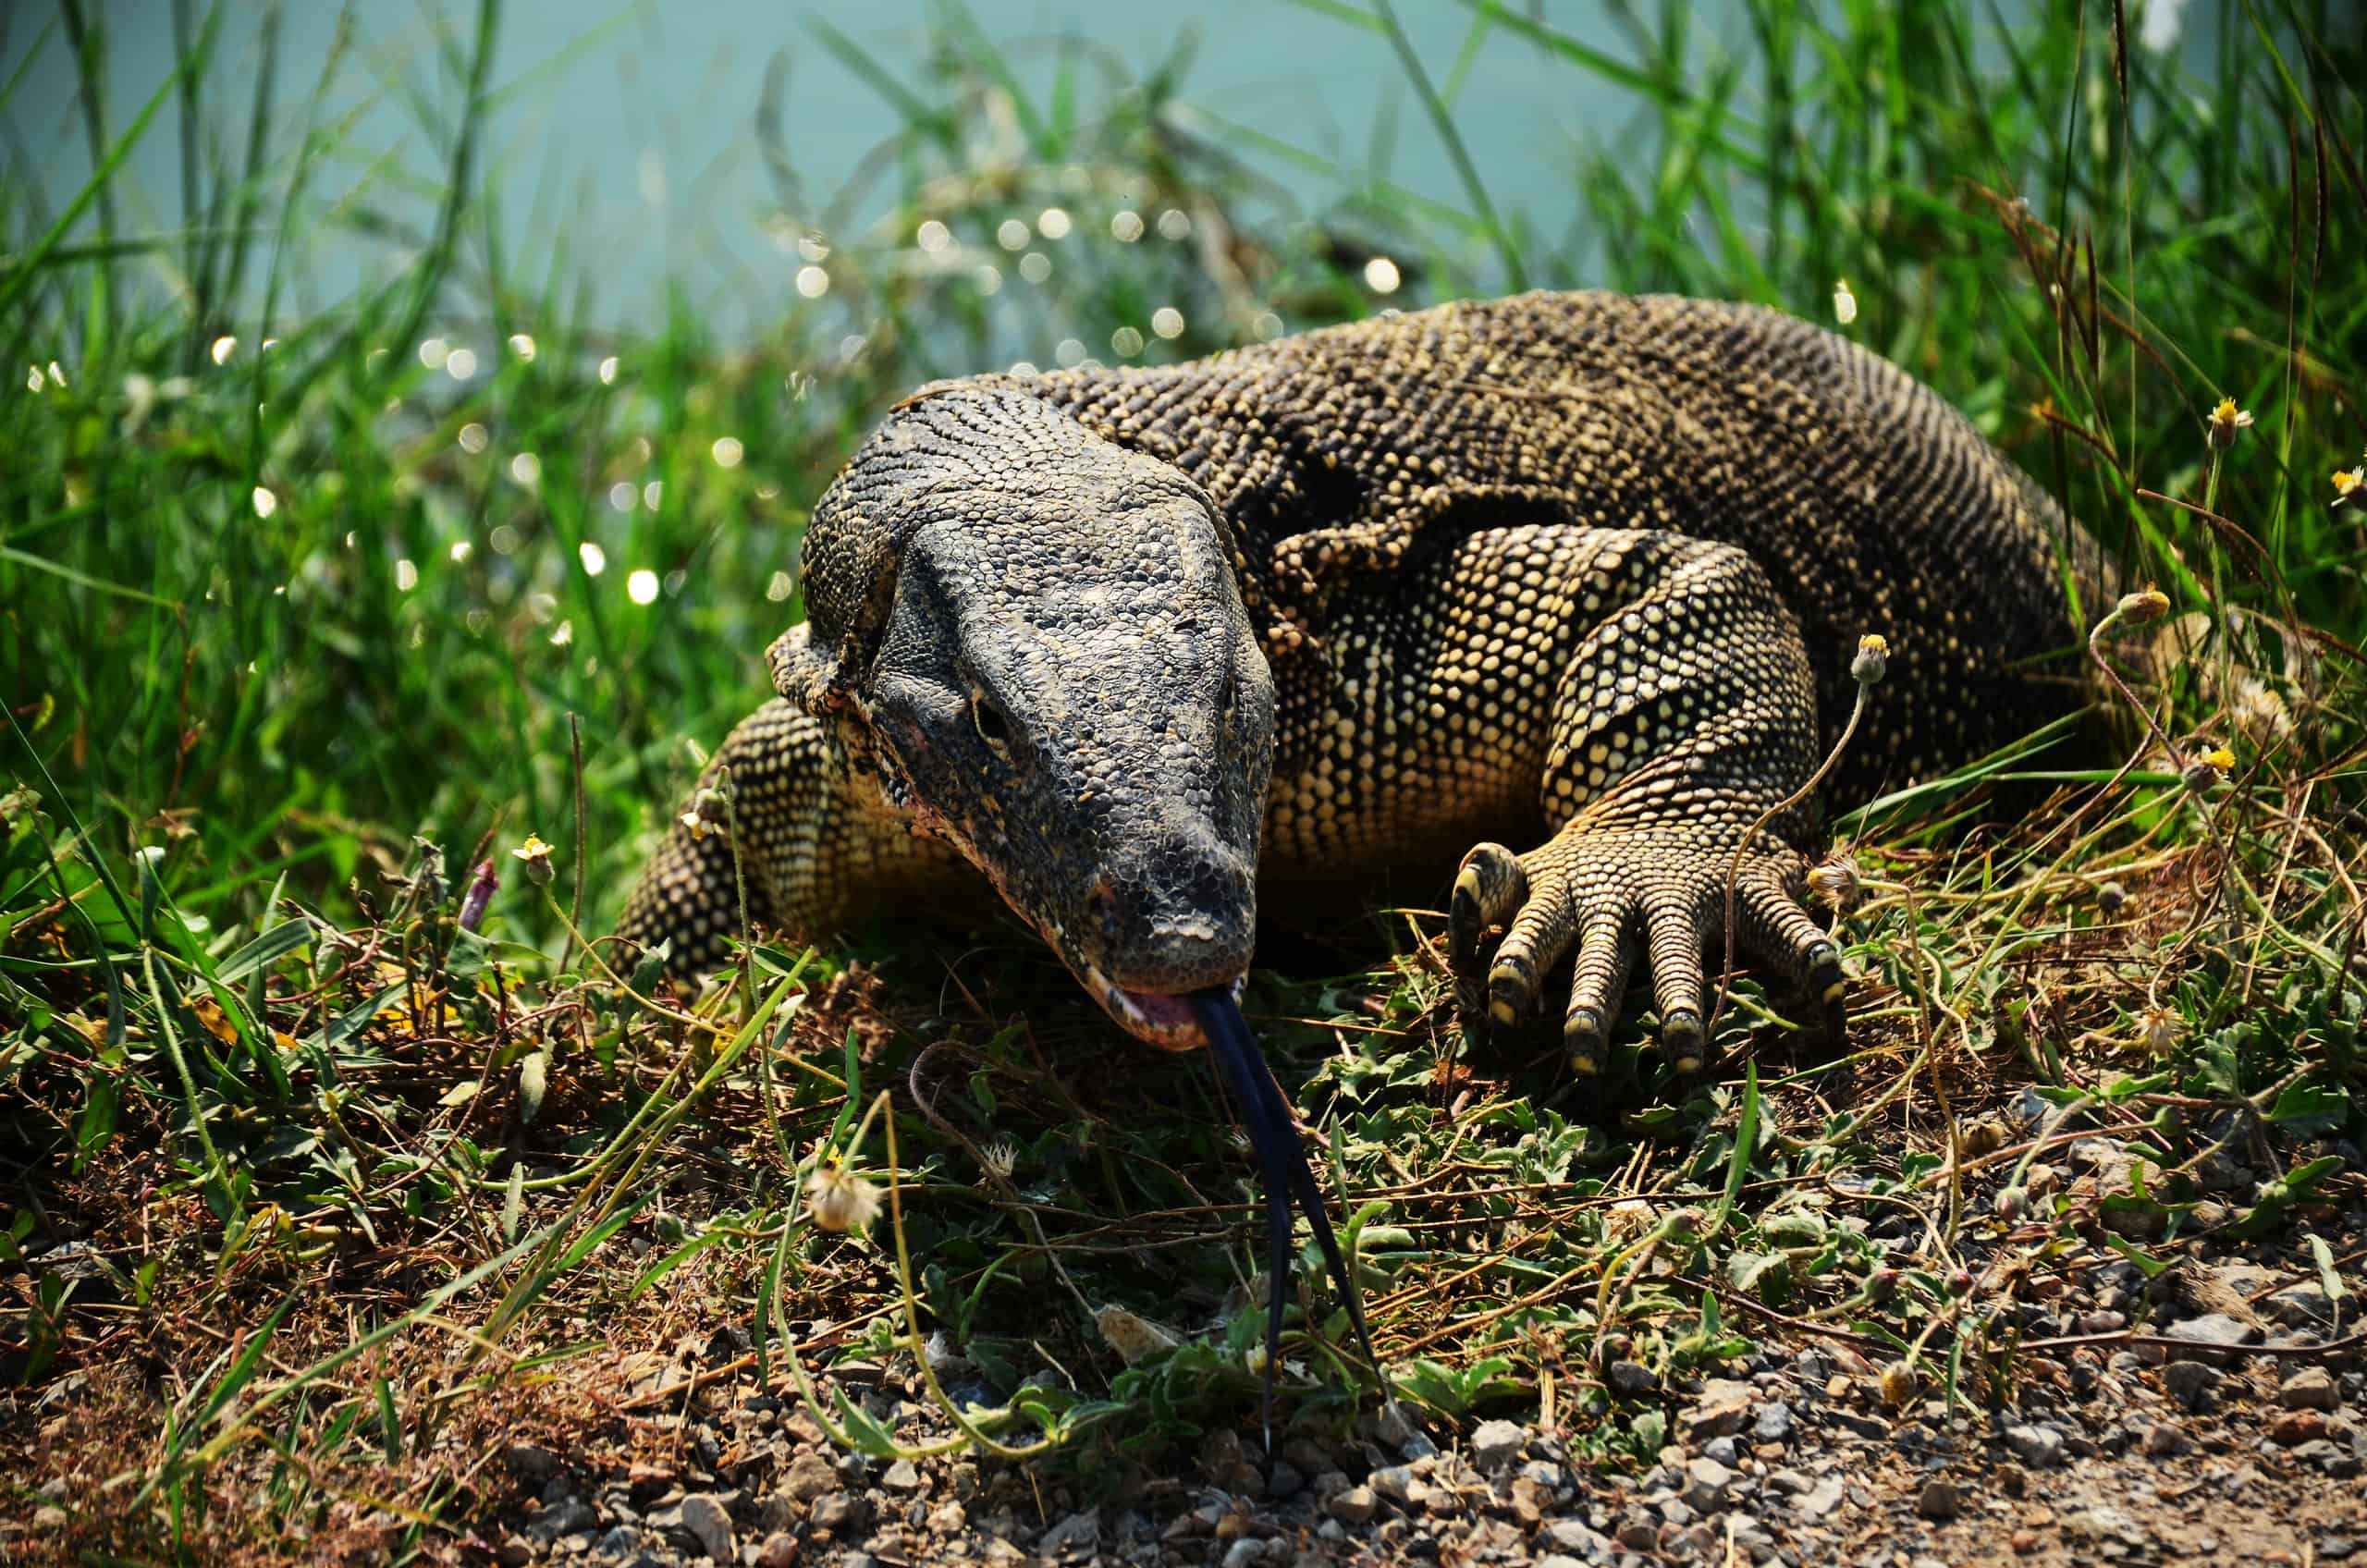 Monitor lizard stares forward with its tongue out